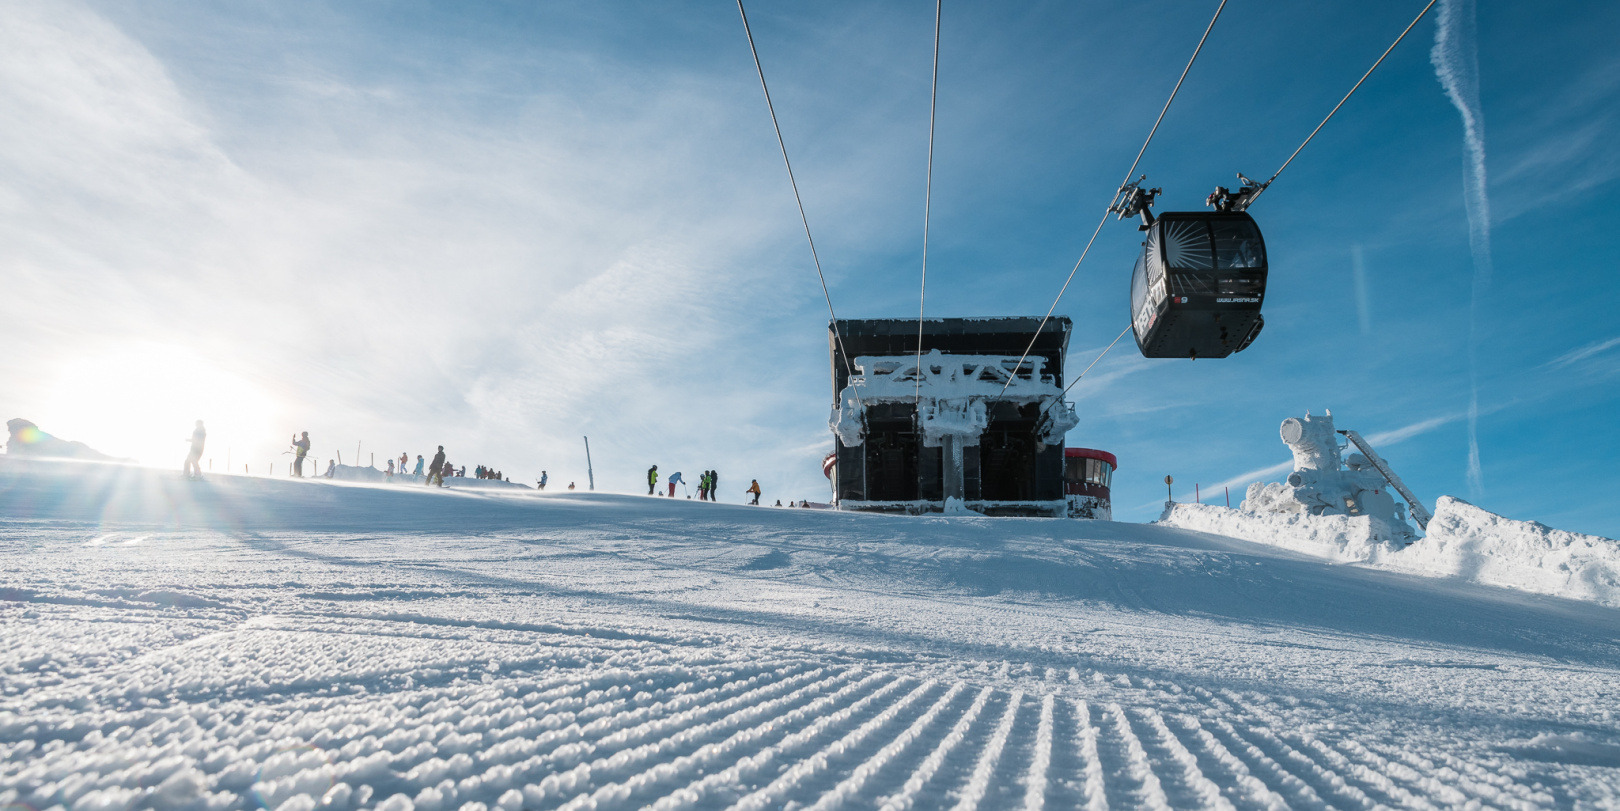 JUNIOR tariff for ski passes and cable car tickets